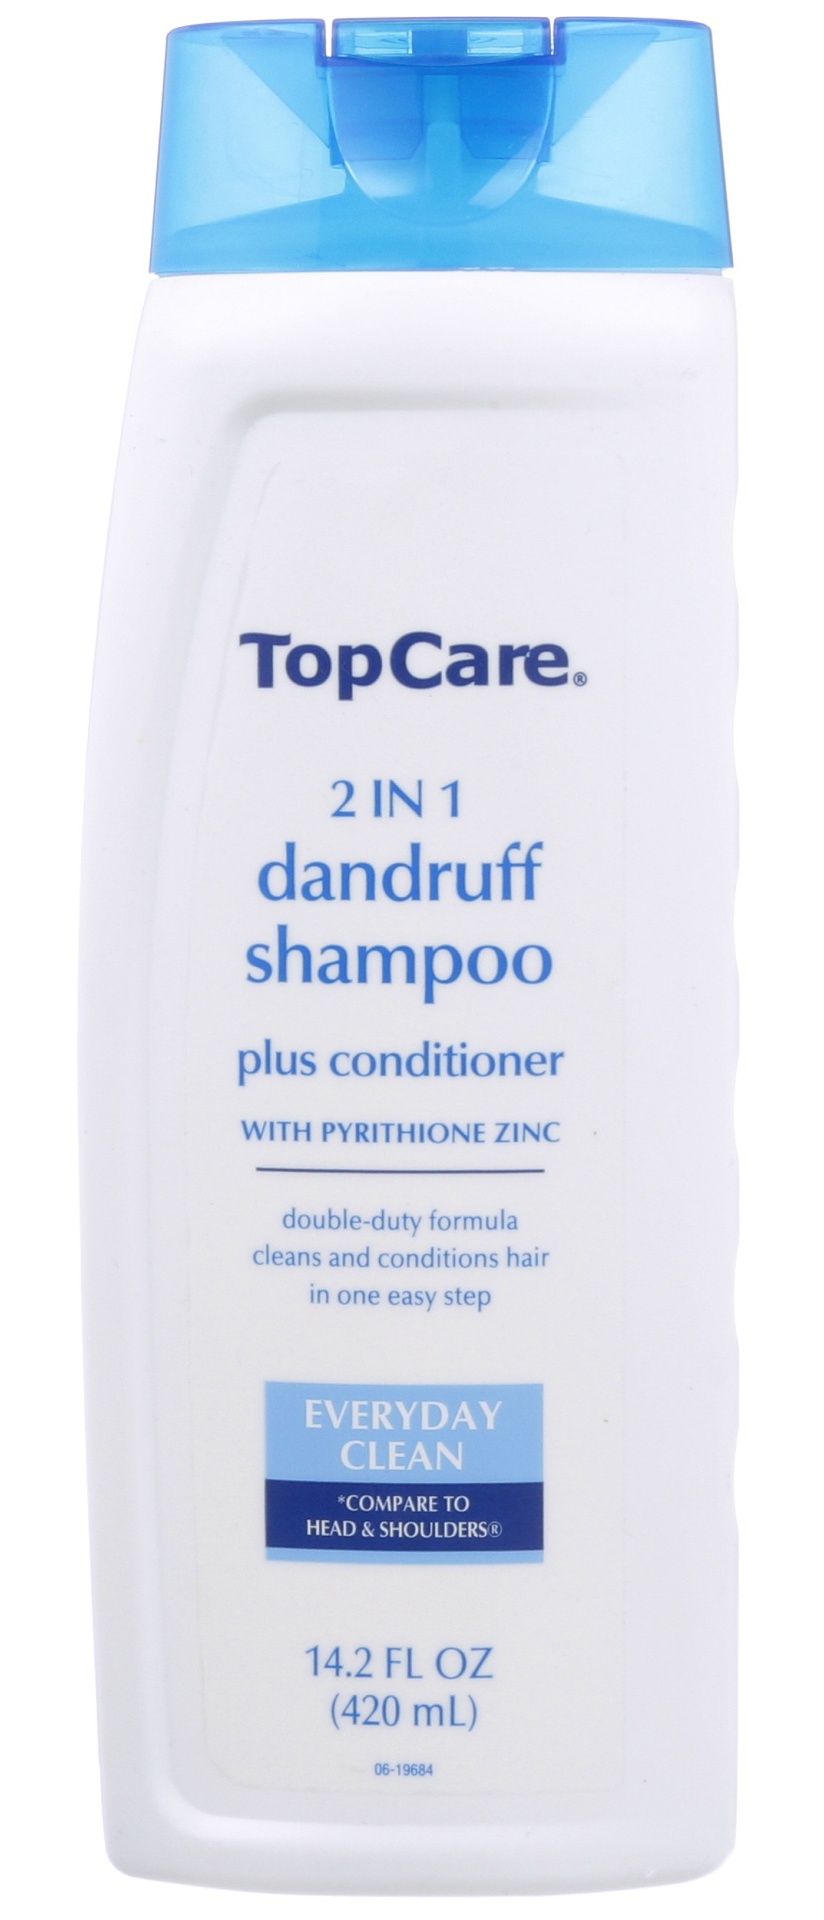 Top Care 2 In 1 Every Day Clean Dandruff Shampoo And Conditioner